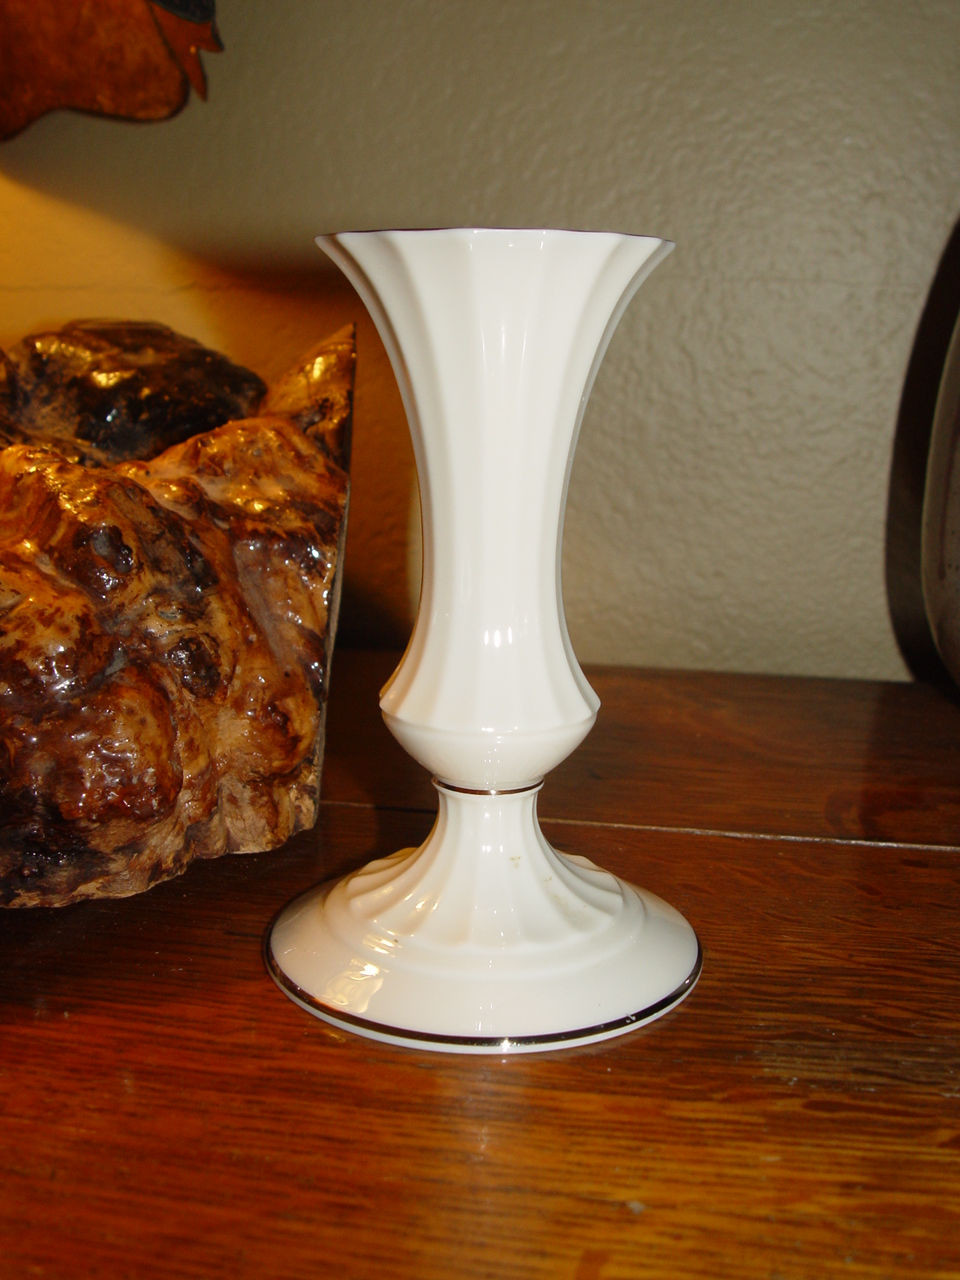 30 Cute Lenox Single Flower Vase 2024 free download lenox single flower vase of back n time antiques antiques page in lenox candleholder candlestick holders fluted porcelain china made in america classic w platinum trim